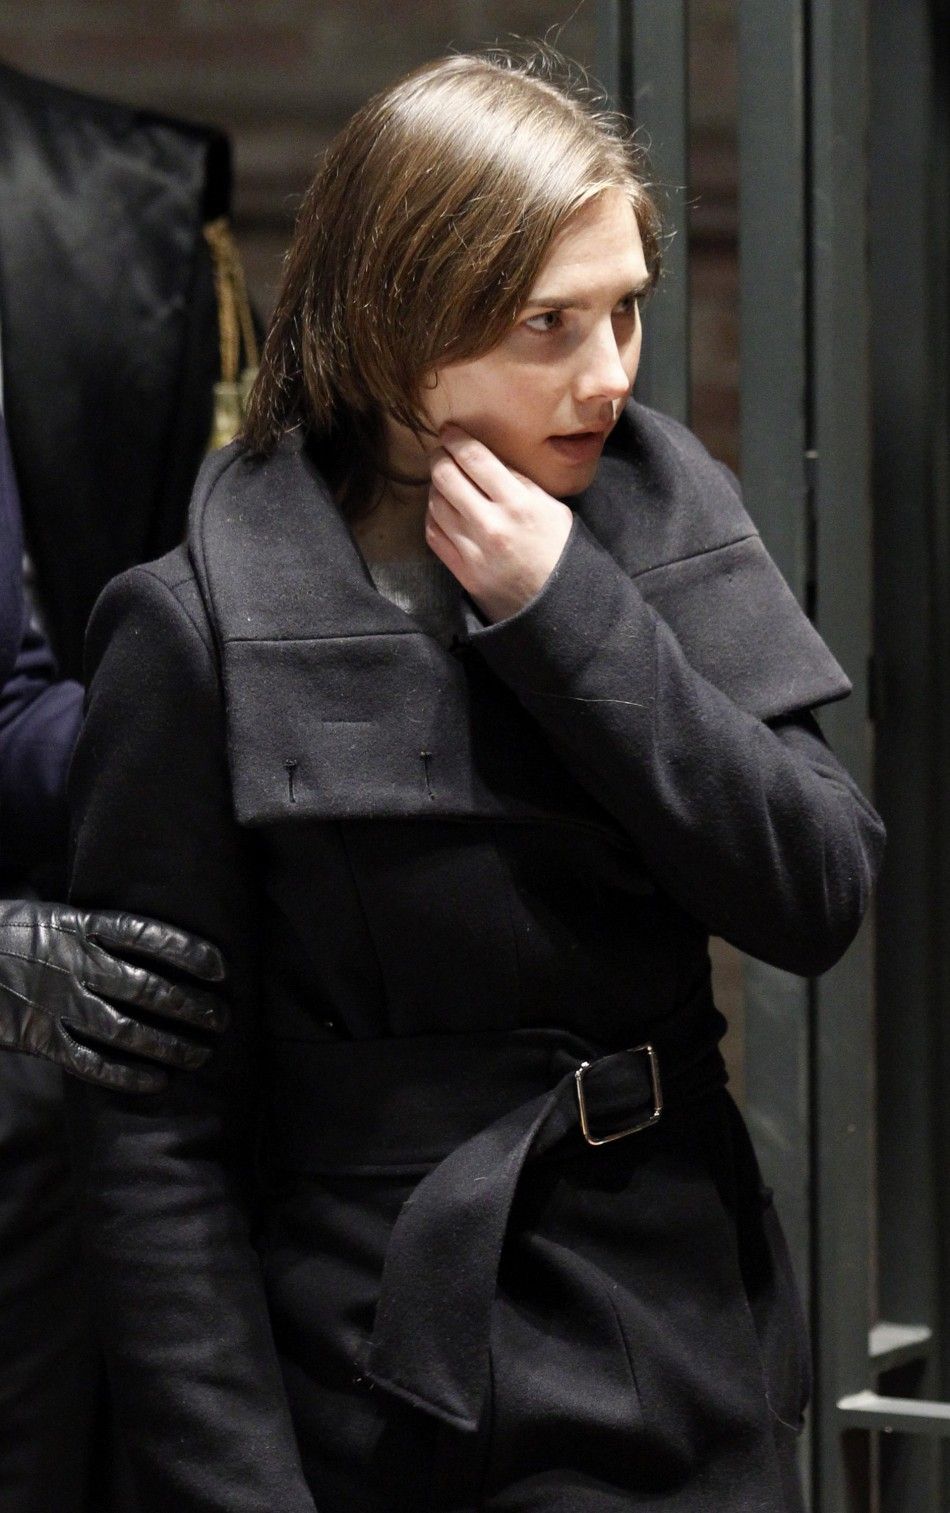 Amanda Knox, the U.S. student convicted of killing her British flatmate in Italy three years ago, returns to the courtroom after a break during a trial session in Perugia